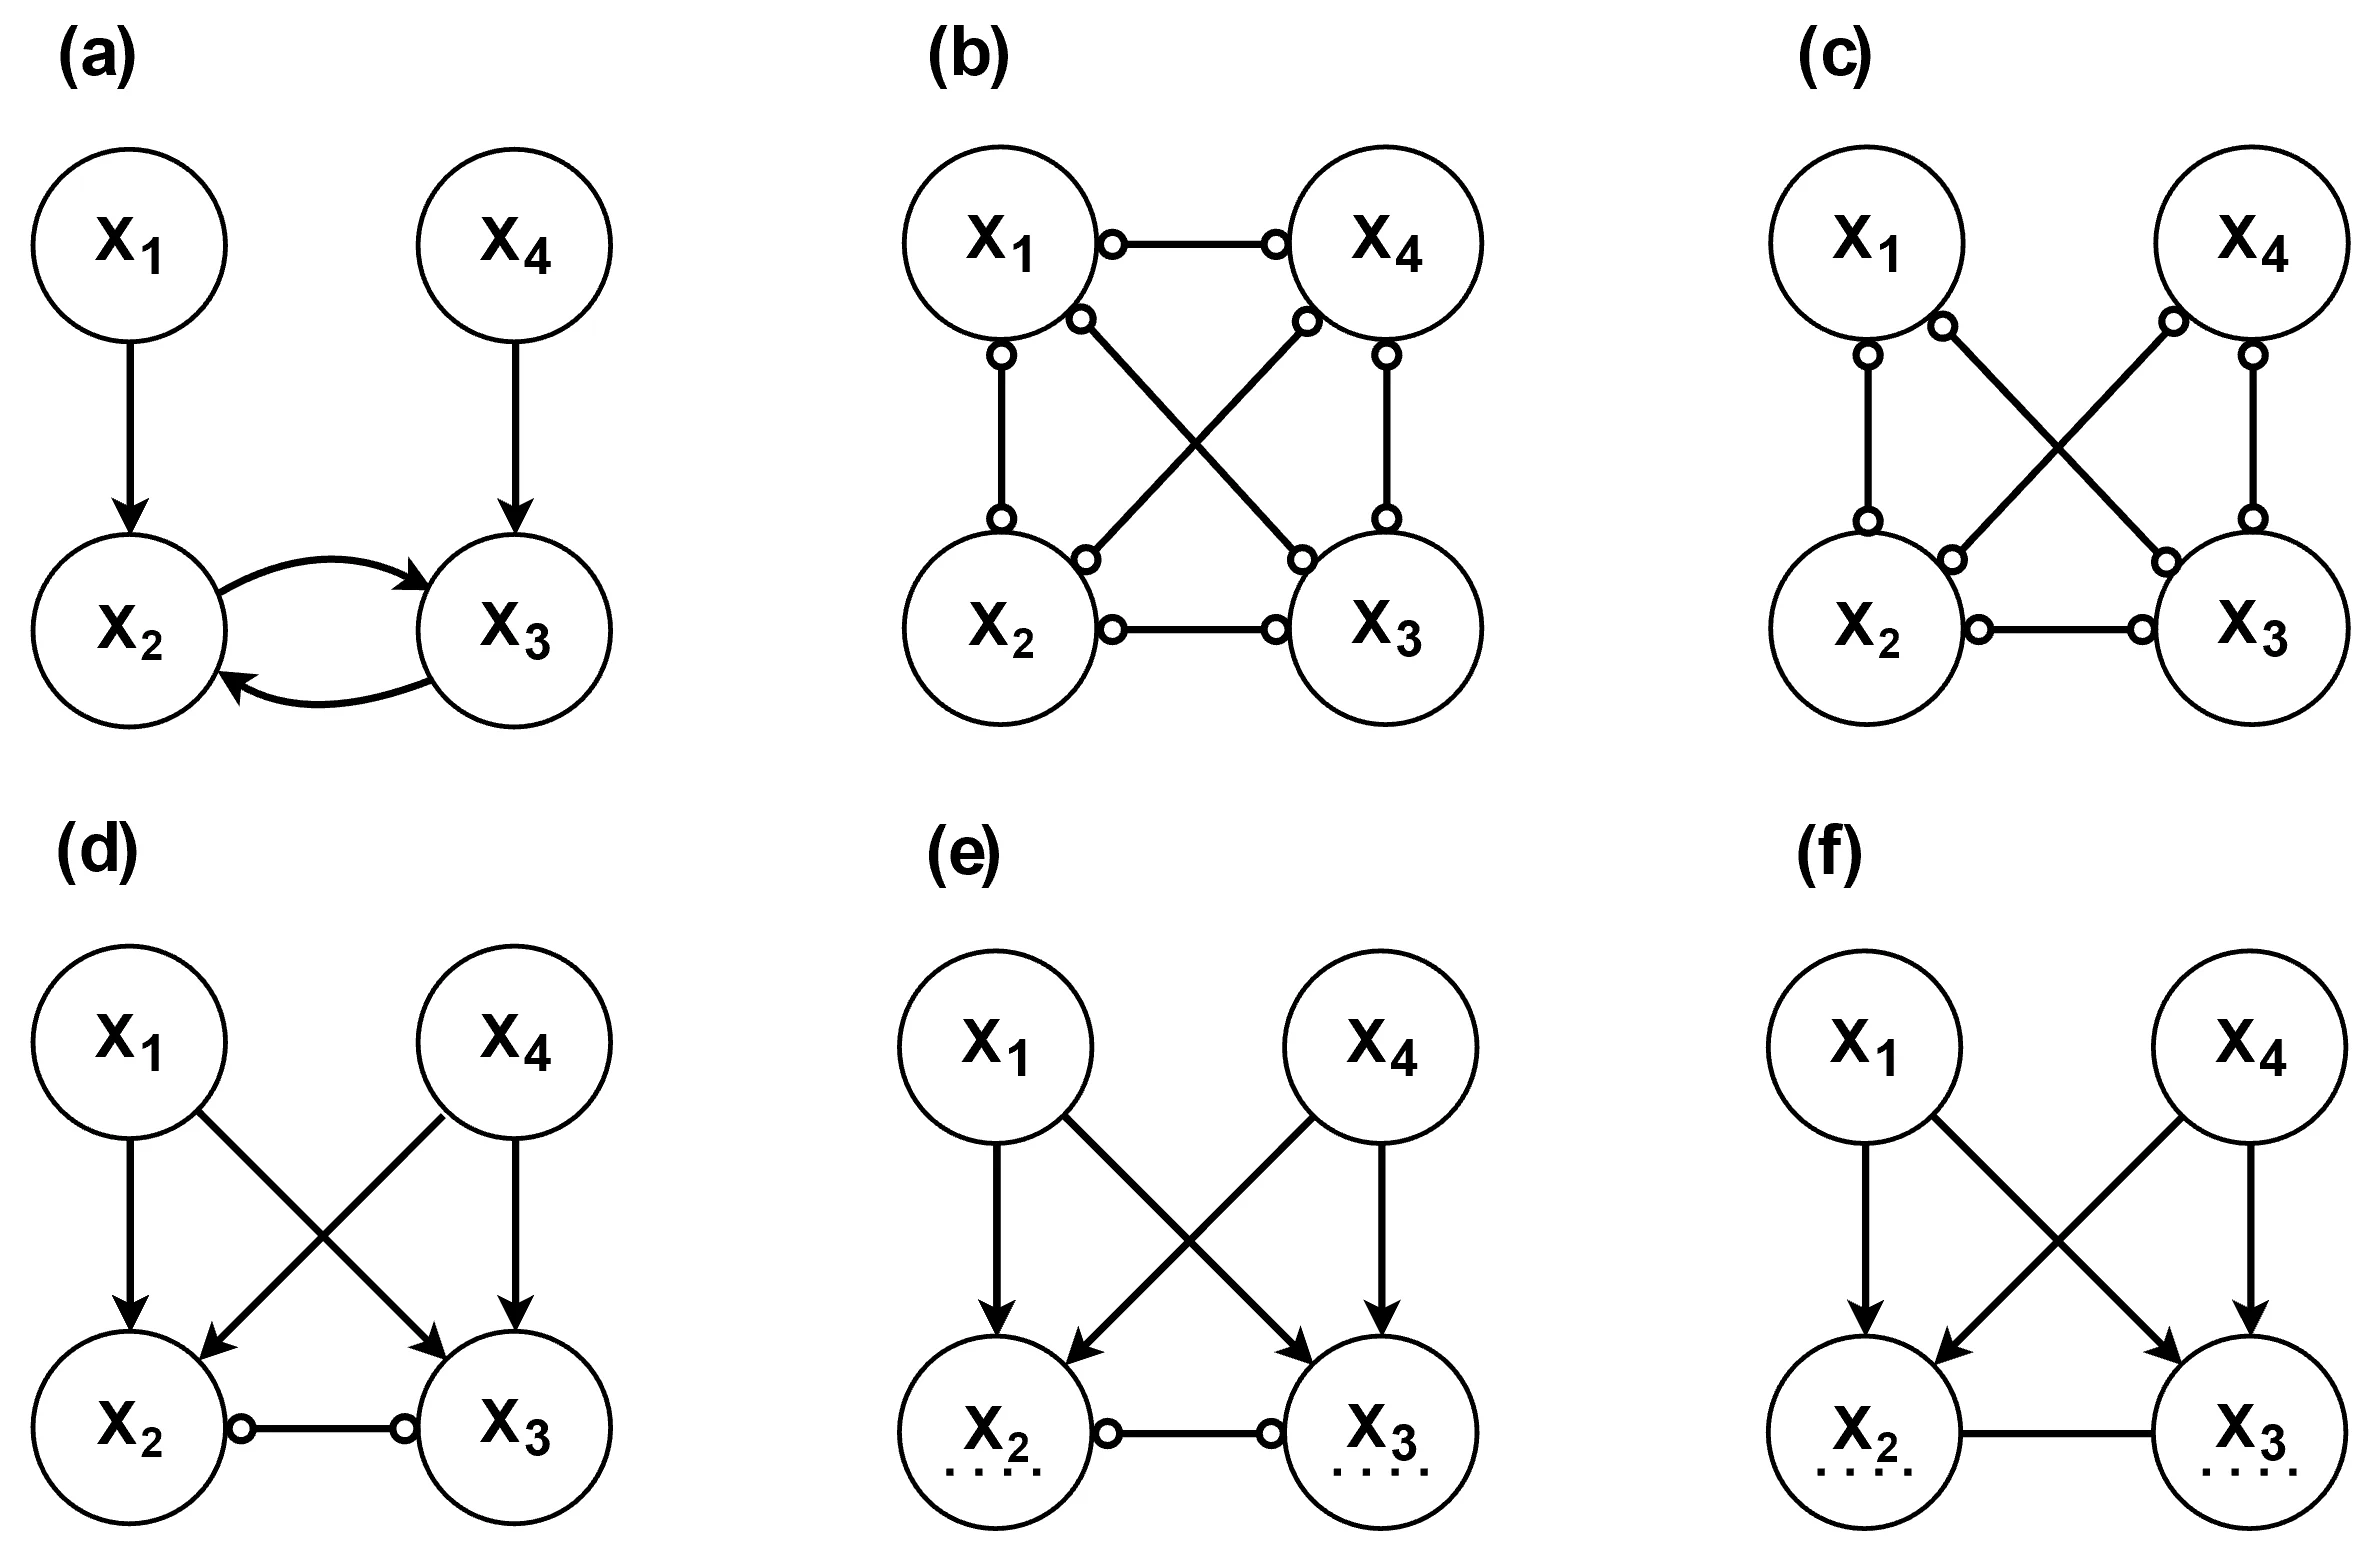 Execution trace of the CCD algorithm showing causal discovery in psychometric networks.